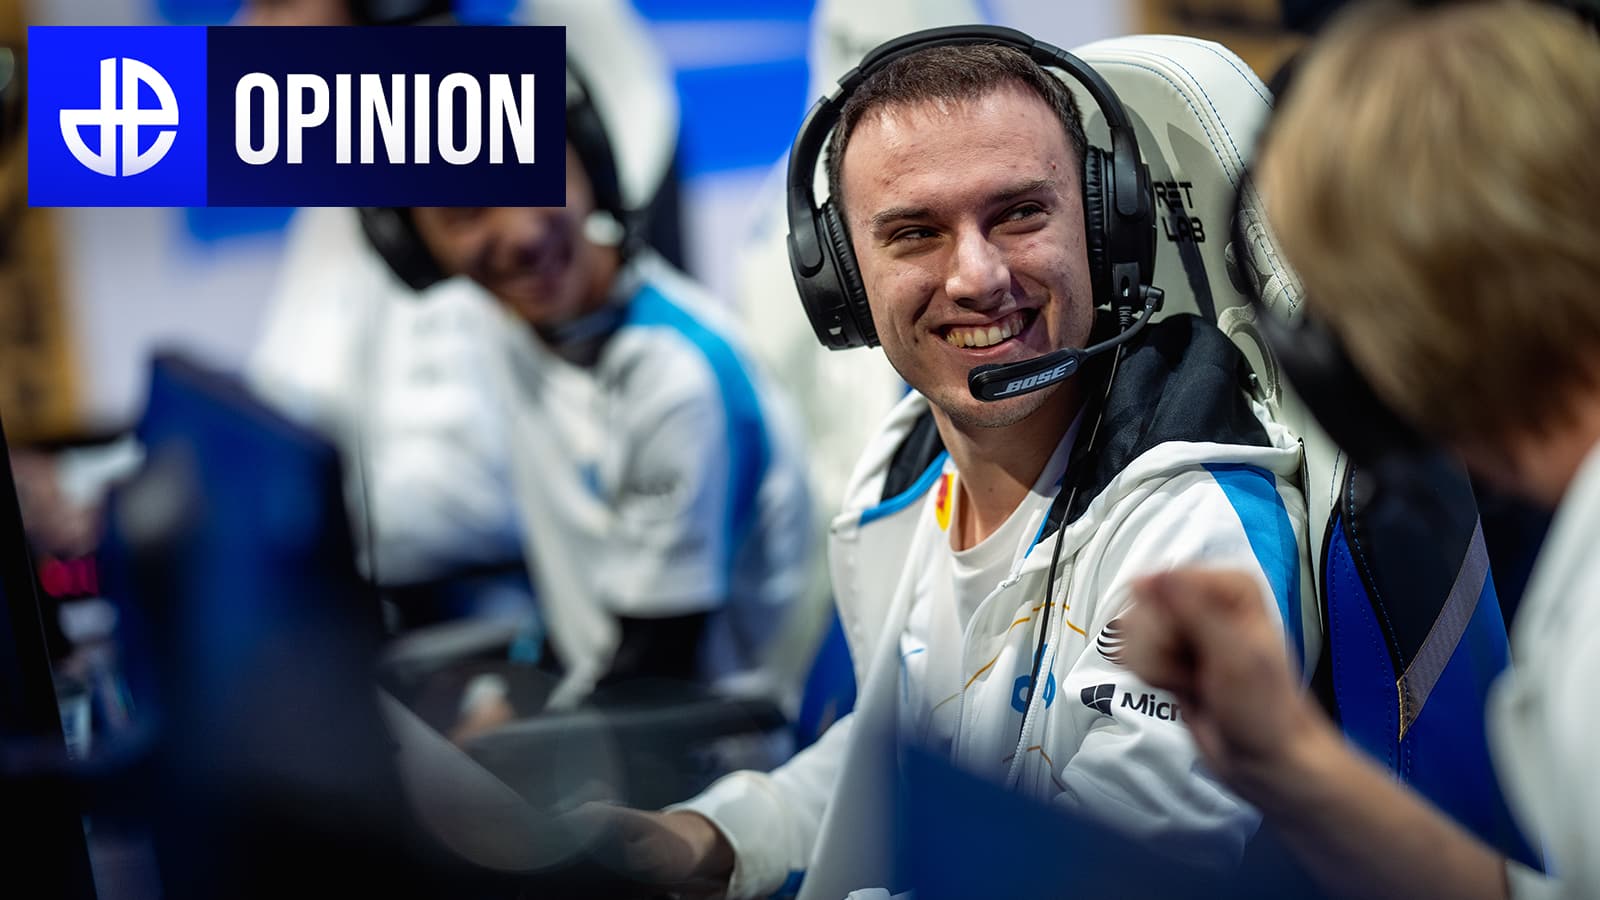 Perkz smiles on stage playing League of Legends for Cloud9.